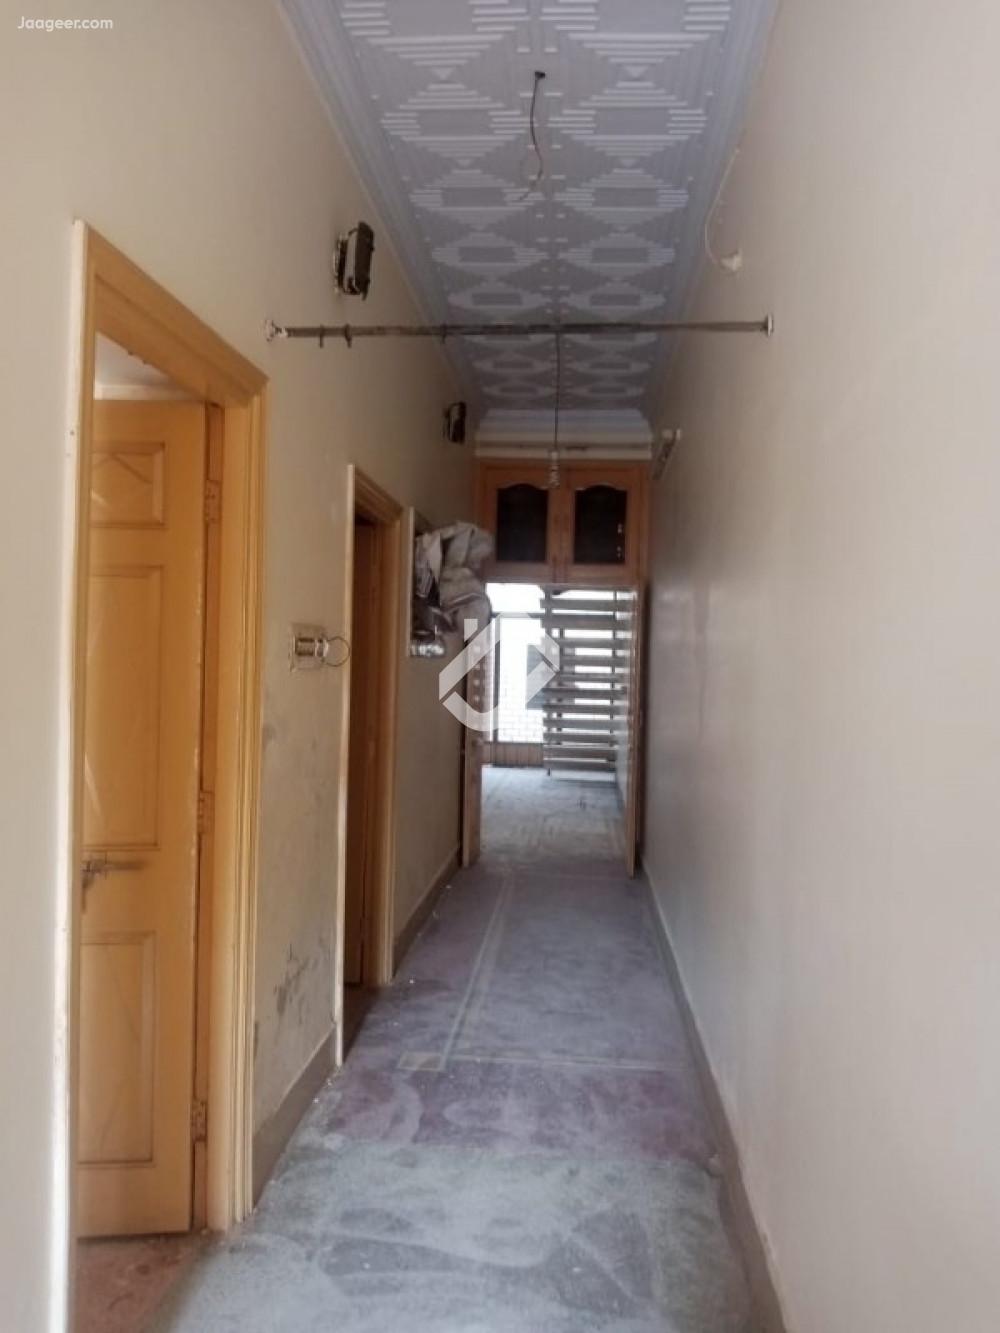 View  4 Marla Upper Portion House For Rent In Iqbal Colony in Iqbal Colony, Sargodha